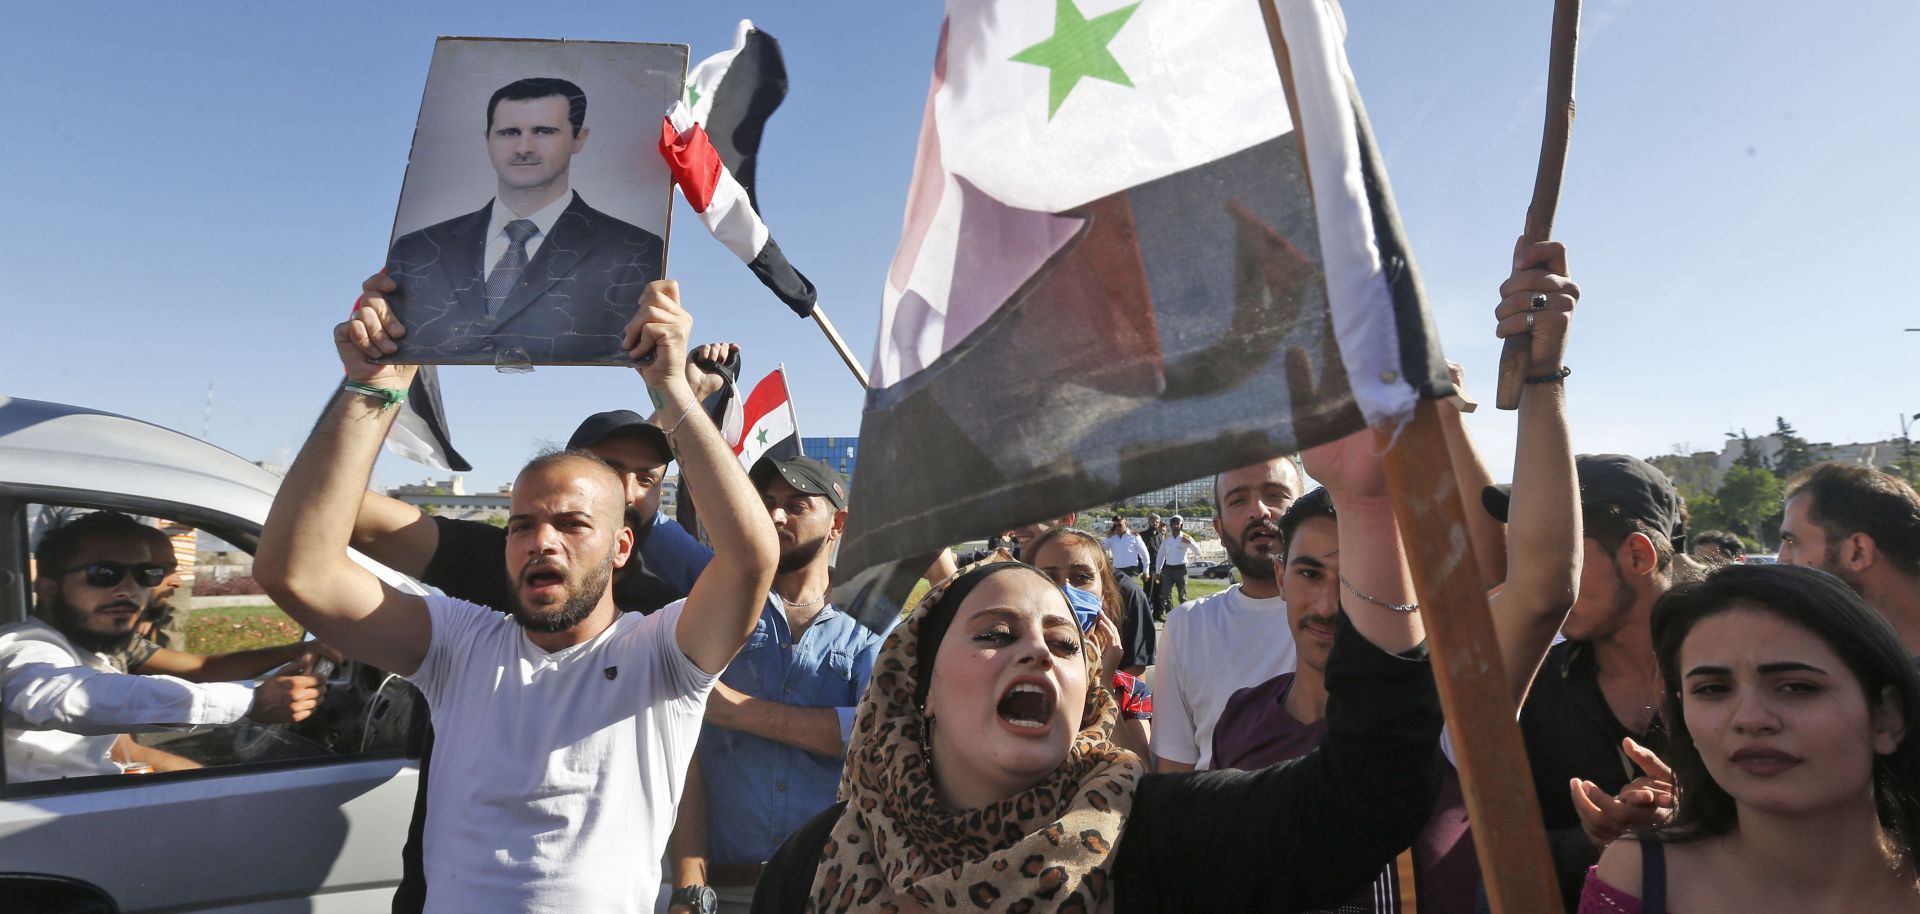 A rally in support of Syrian President Bashar al-Assad on June 11, 2020, at Umayyad Square in Damascus, Syria.